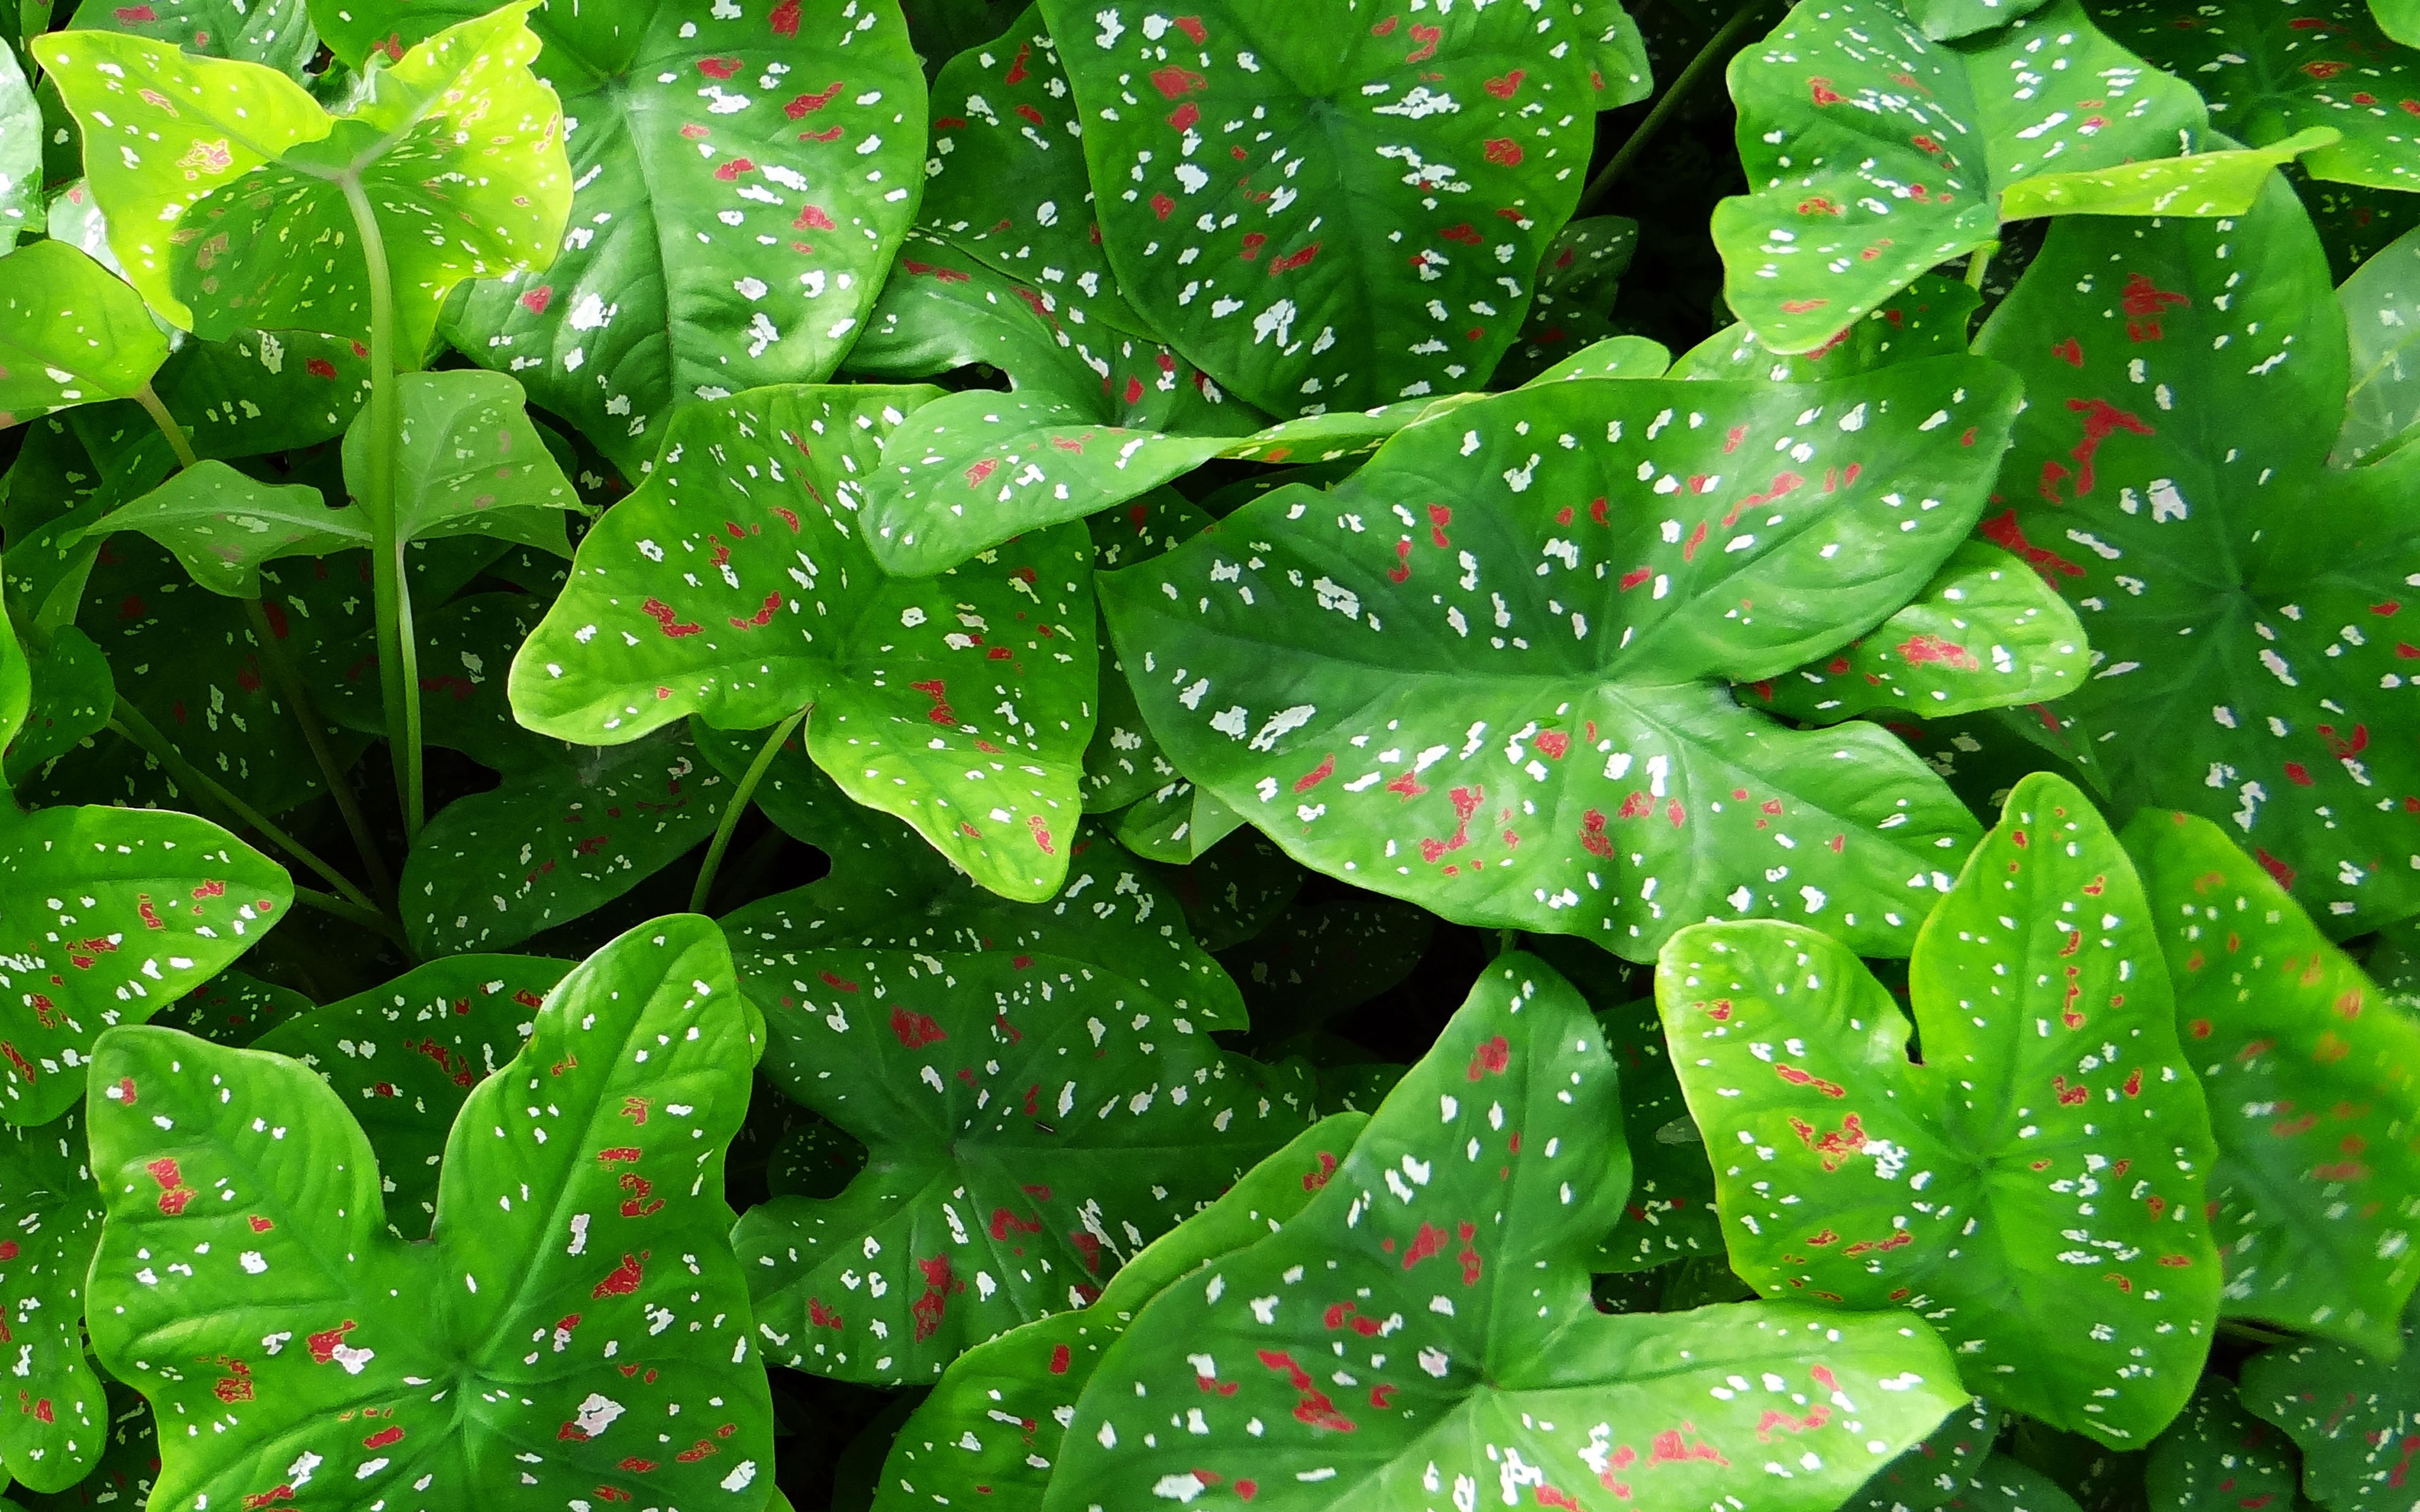 Caladium Plant Light Green Leaves Fluted With White And